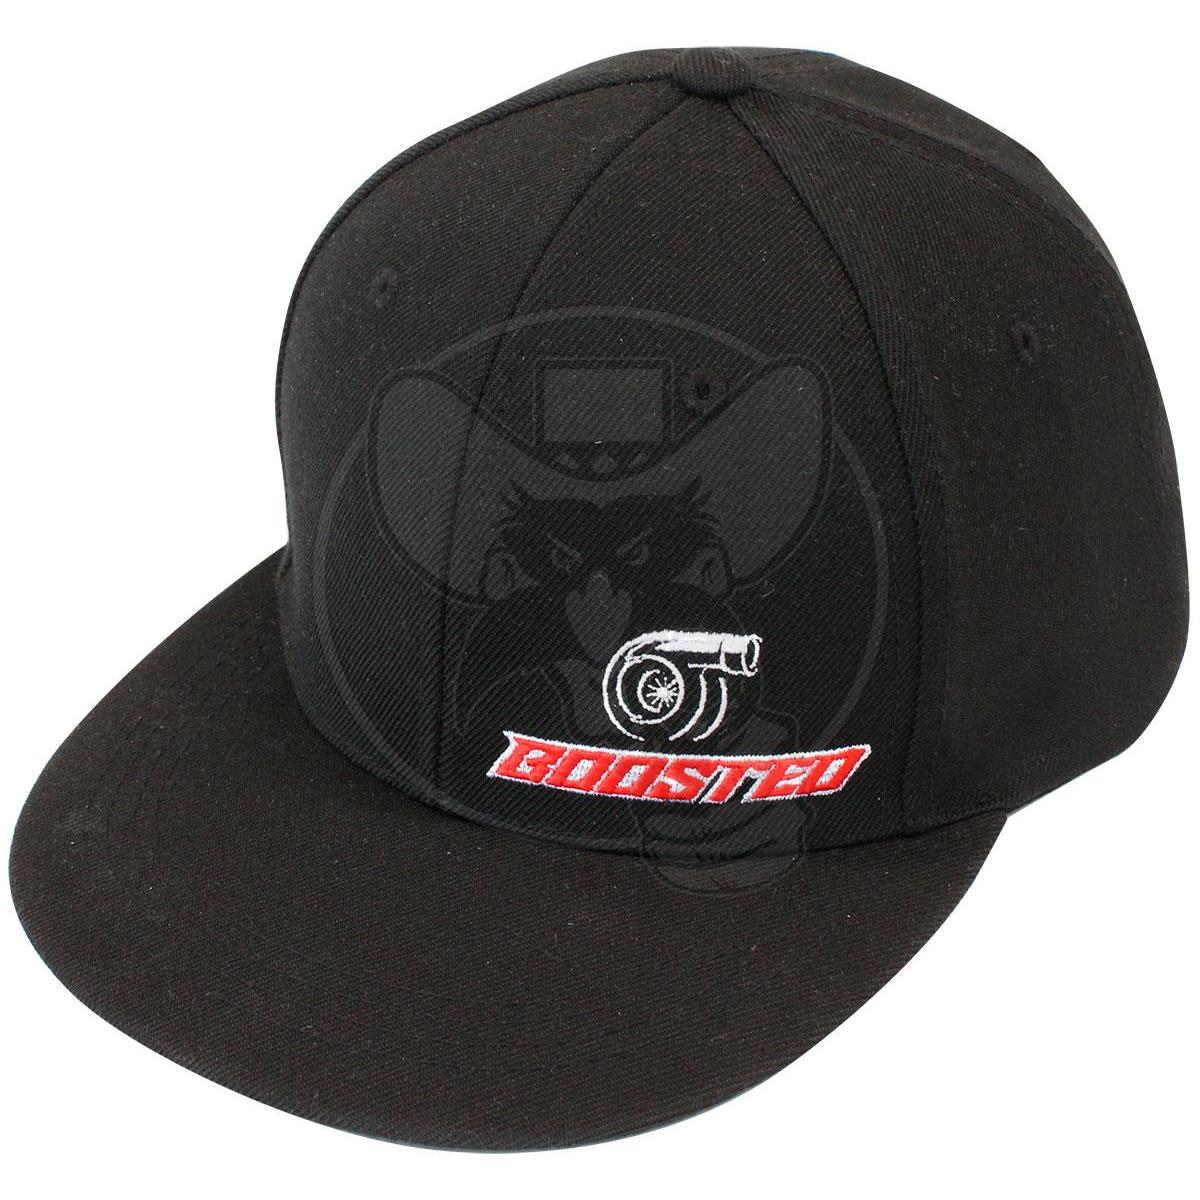 AEROFLOW BOOSTED SNAPBACK HAT WITH BOOSTED LOGO